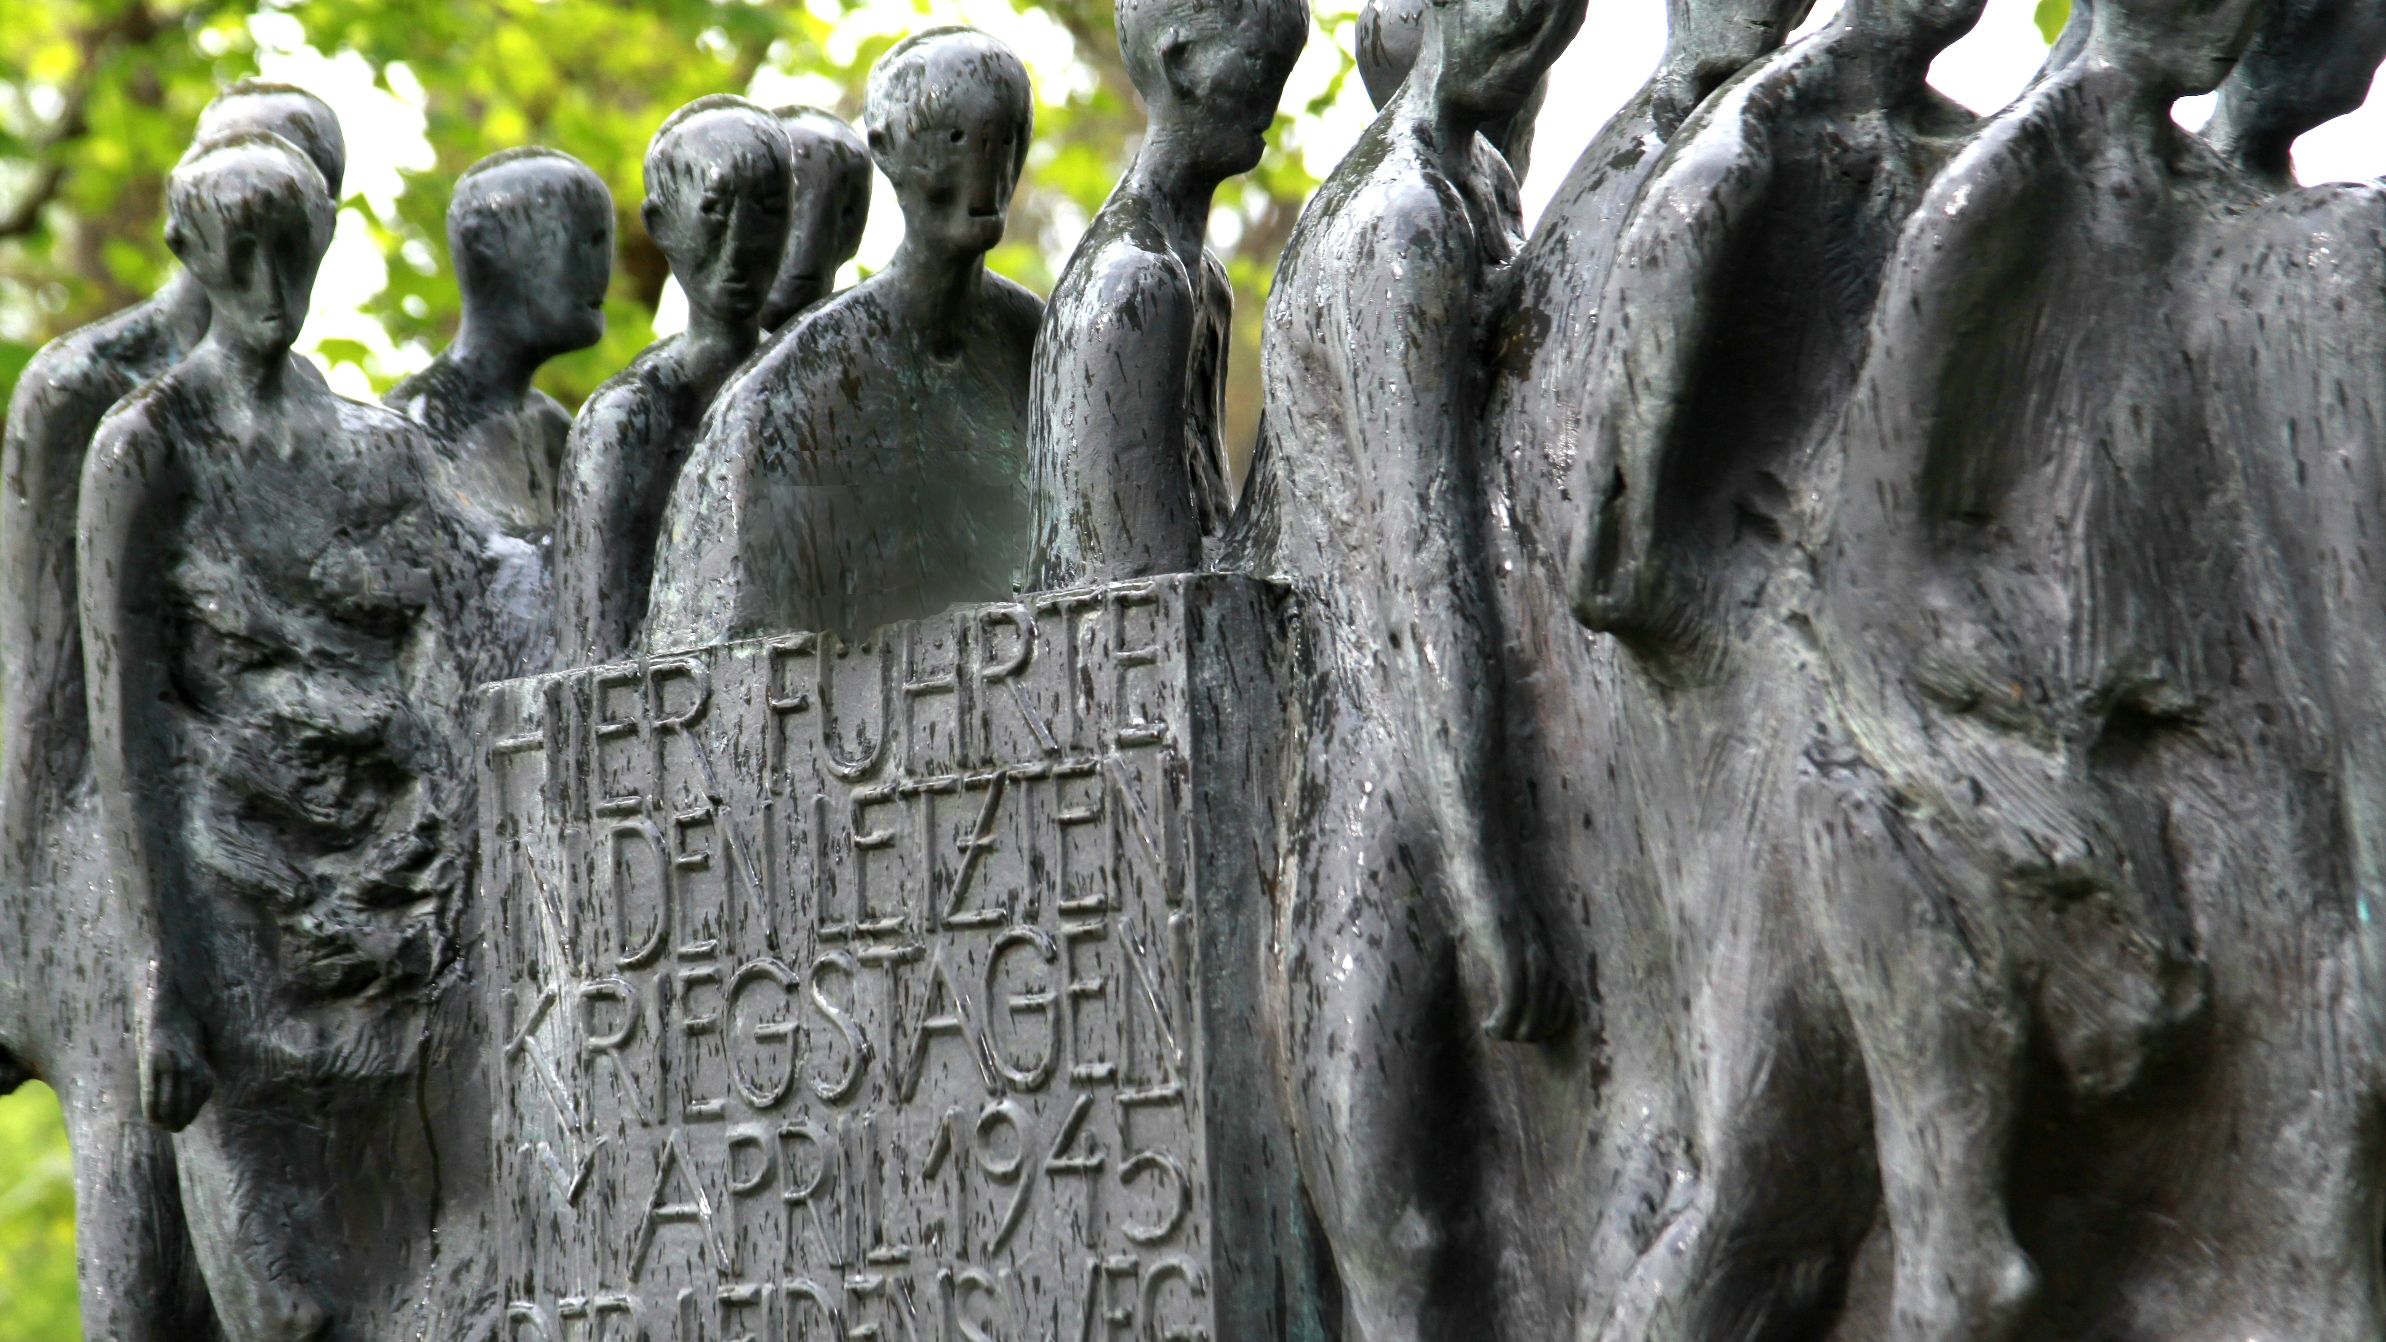 Photo of the memorial commemorating the victims of the "death-marches", located on Theodor-Heuss-Strasse at John F. Kennedy Square in Dachau, Photo: City of Dachau